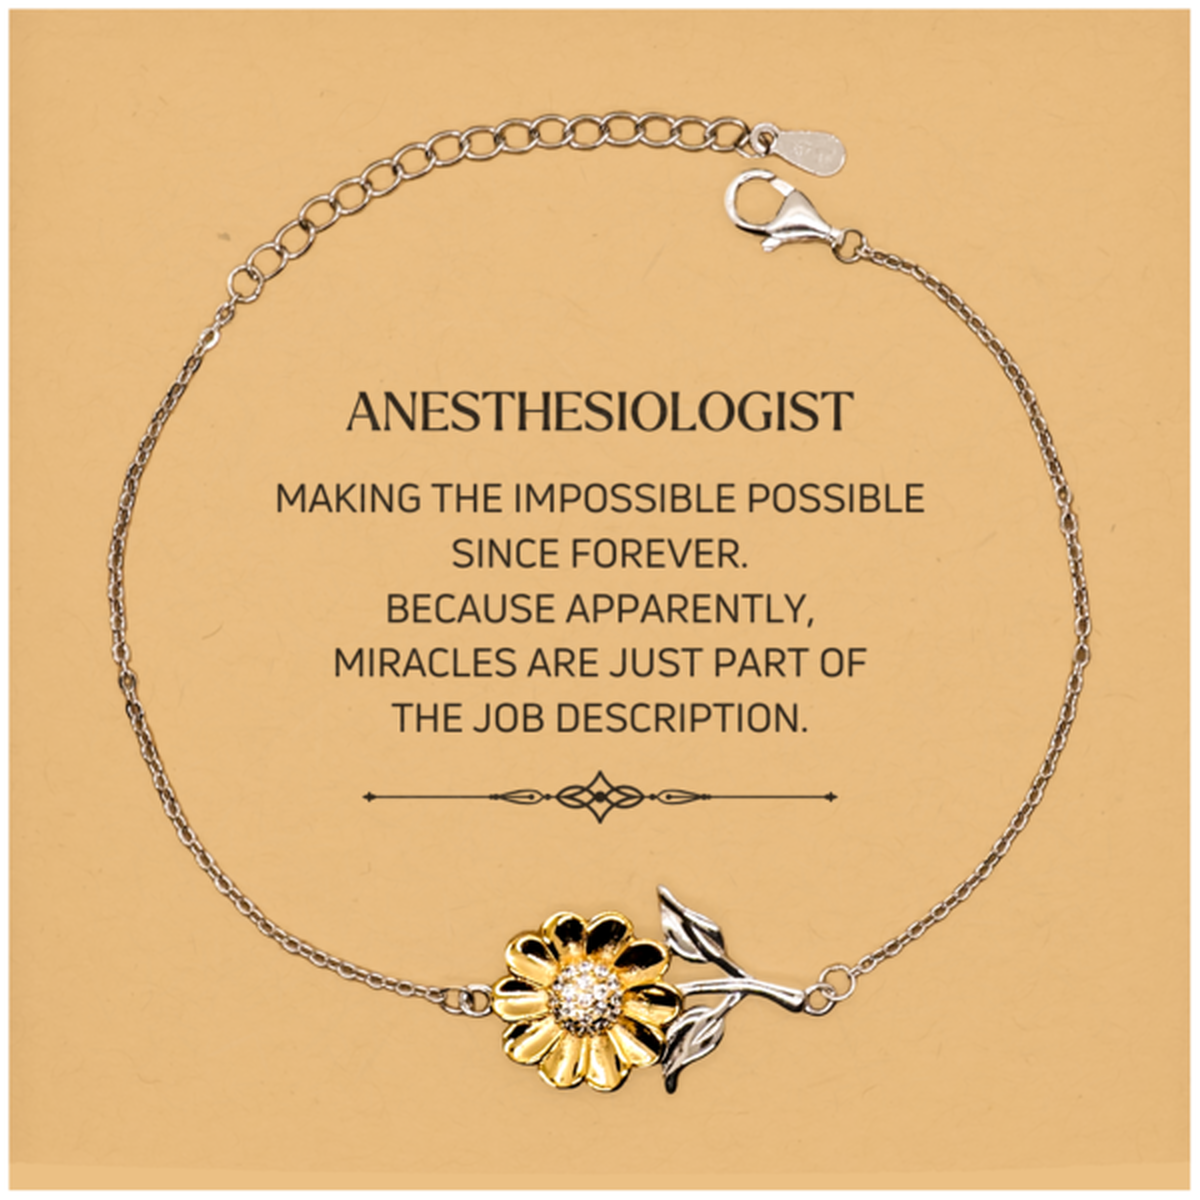 Funny Anesthesiologist Gifts, Miracles are just part of the job description, Inspirational Birthday Christmas Sunflower Bracelet For Anesthesiologist, Men, Women, Coworkers, Friends, Boss